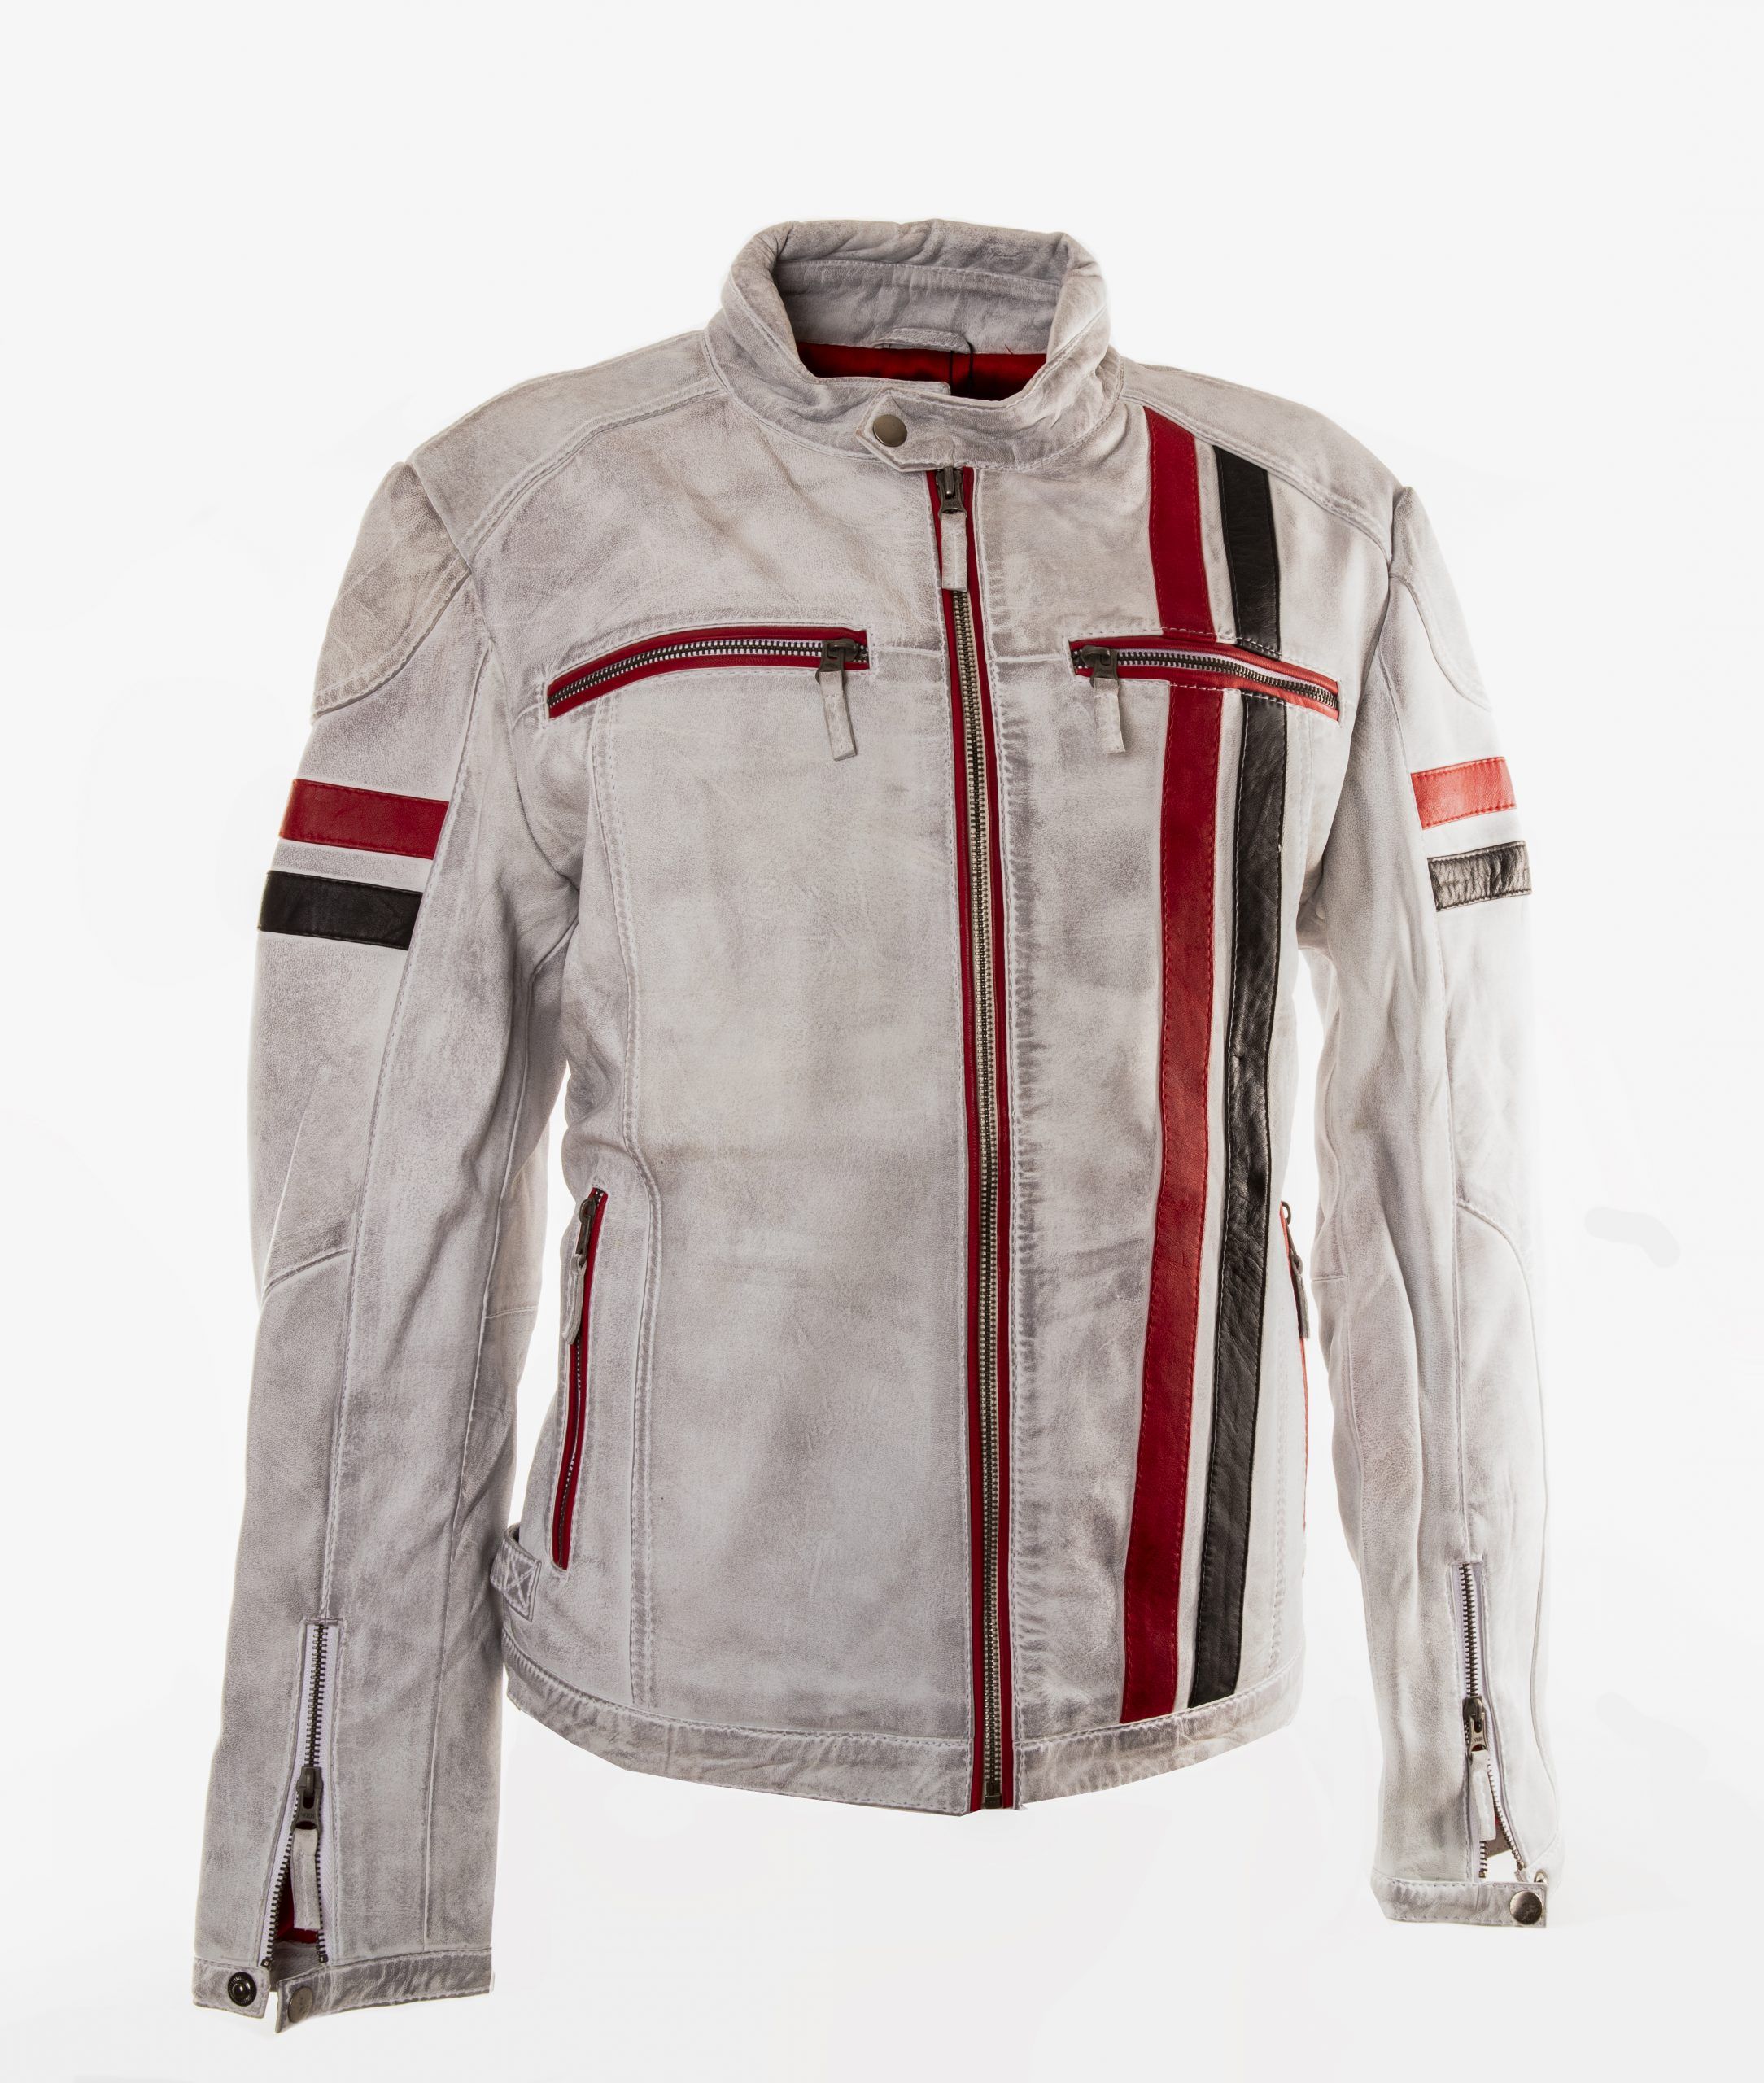 Le Mans Leather Jacket - Second Skin Leather and Sheepskin Clothing